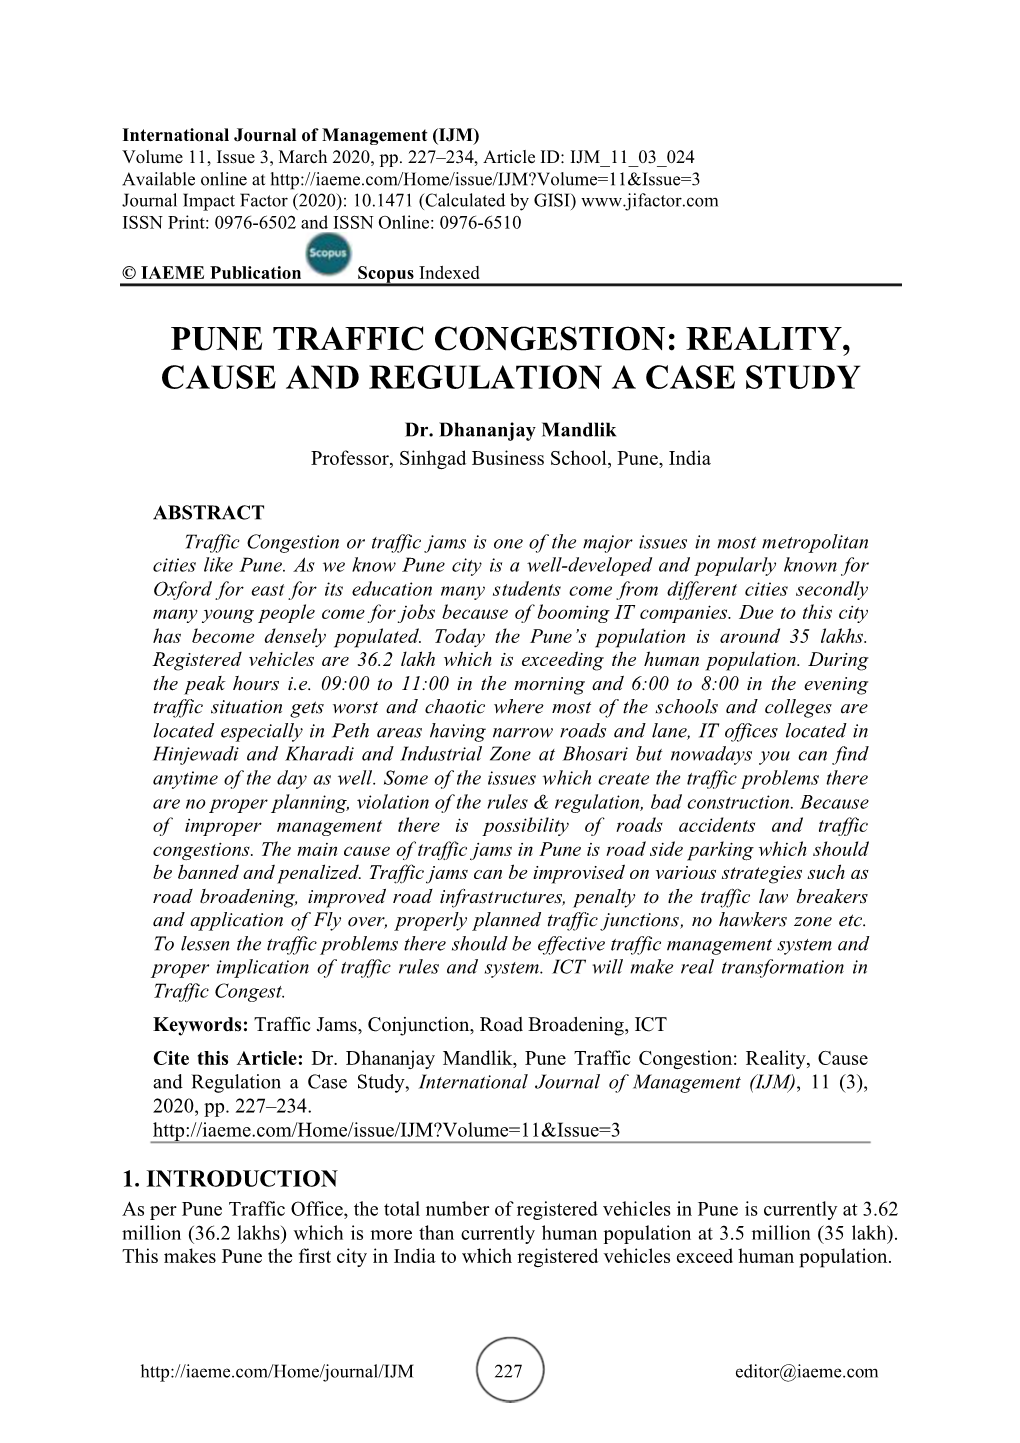 Pune Traffic Congestion: Reality, Cause and Regulation a Case Study